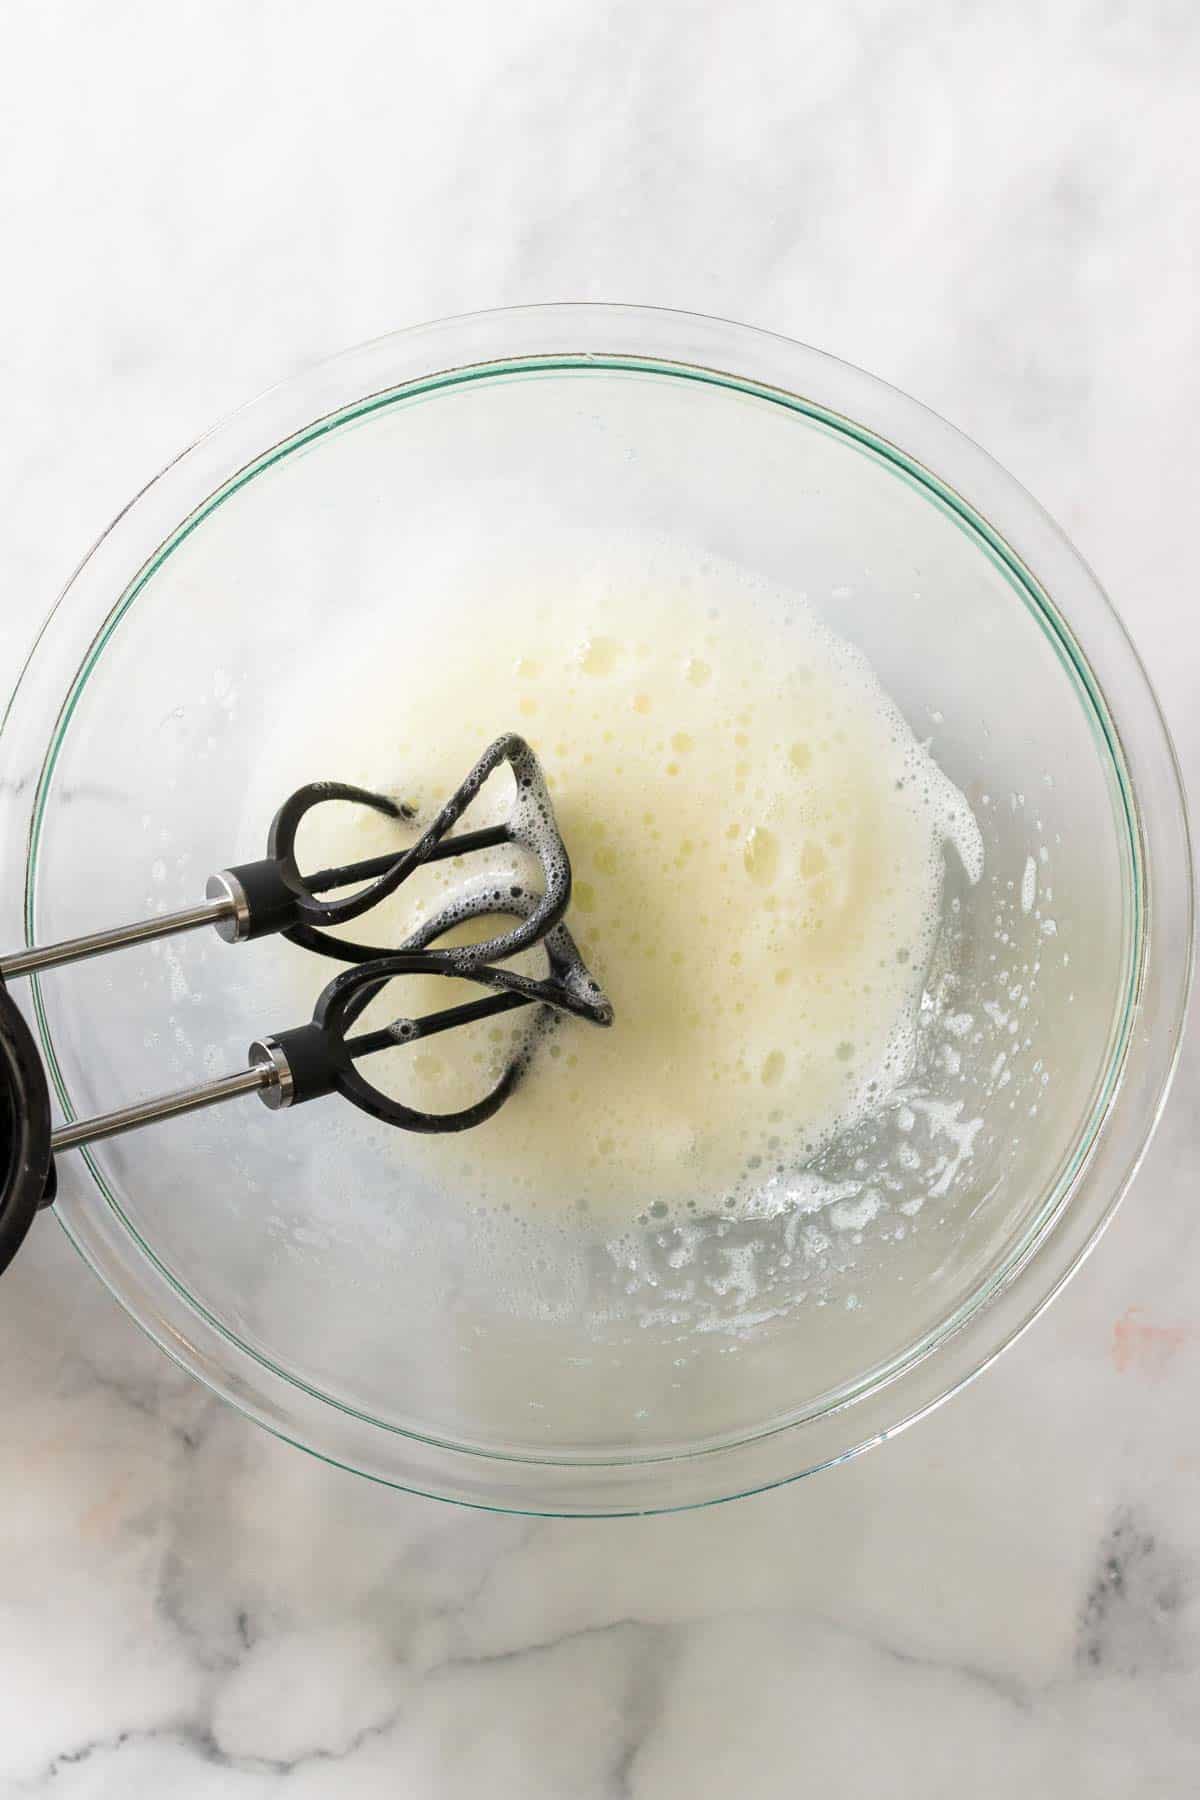 Slightly frothed egg whites in a glass bowl with an electric mixer